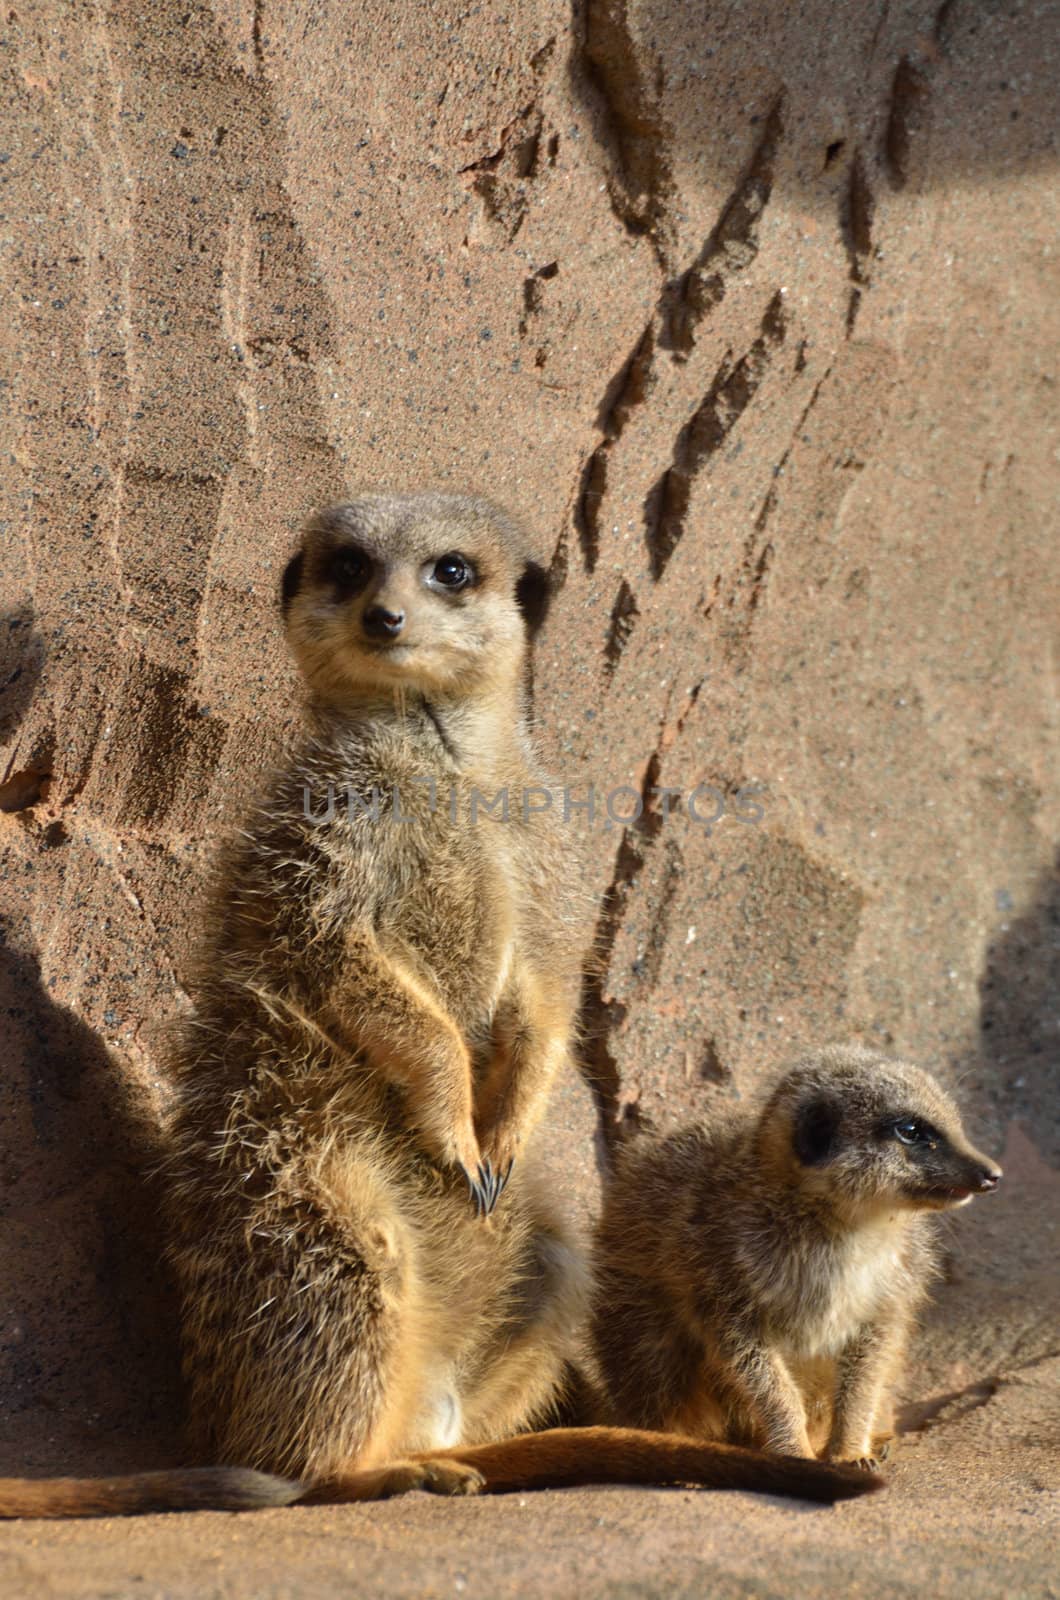 Mother and baby meerkat by pauws99